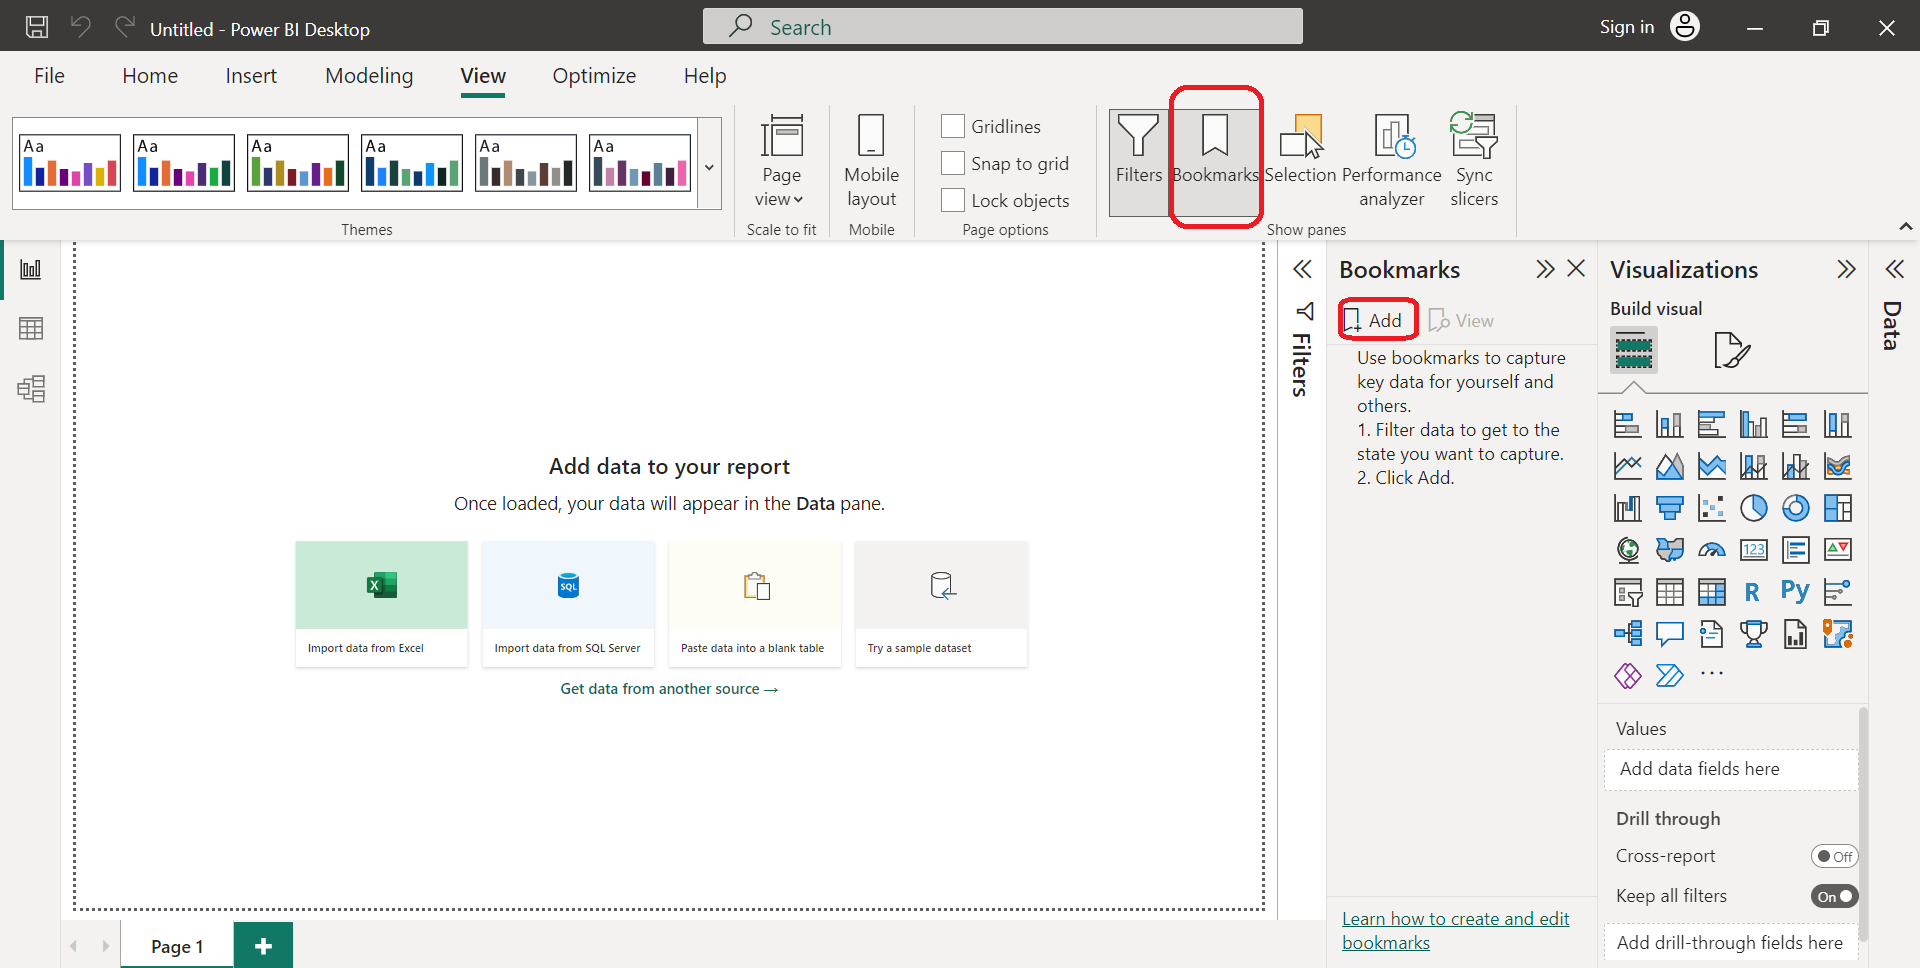 How to create bookmarks in Power BI